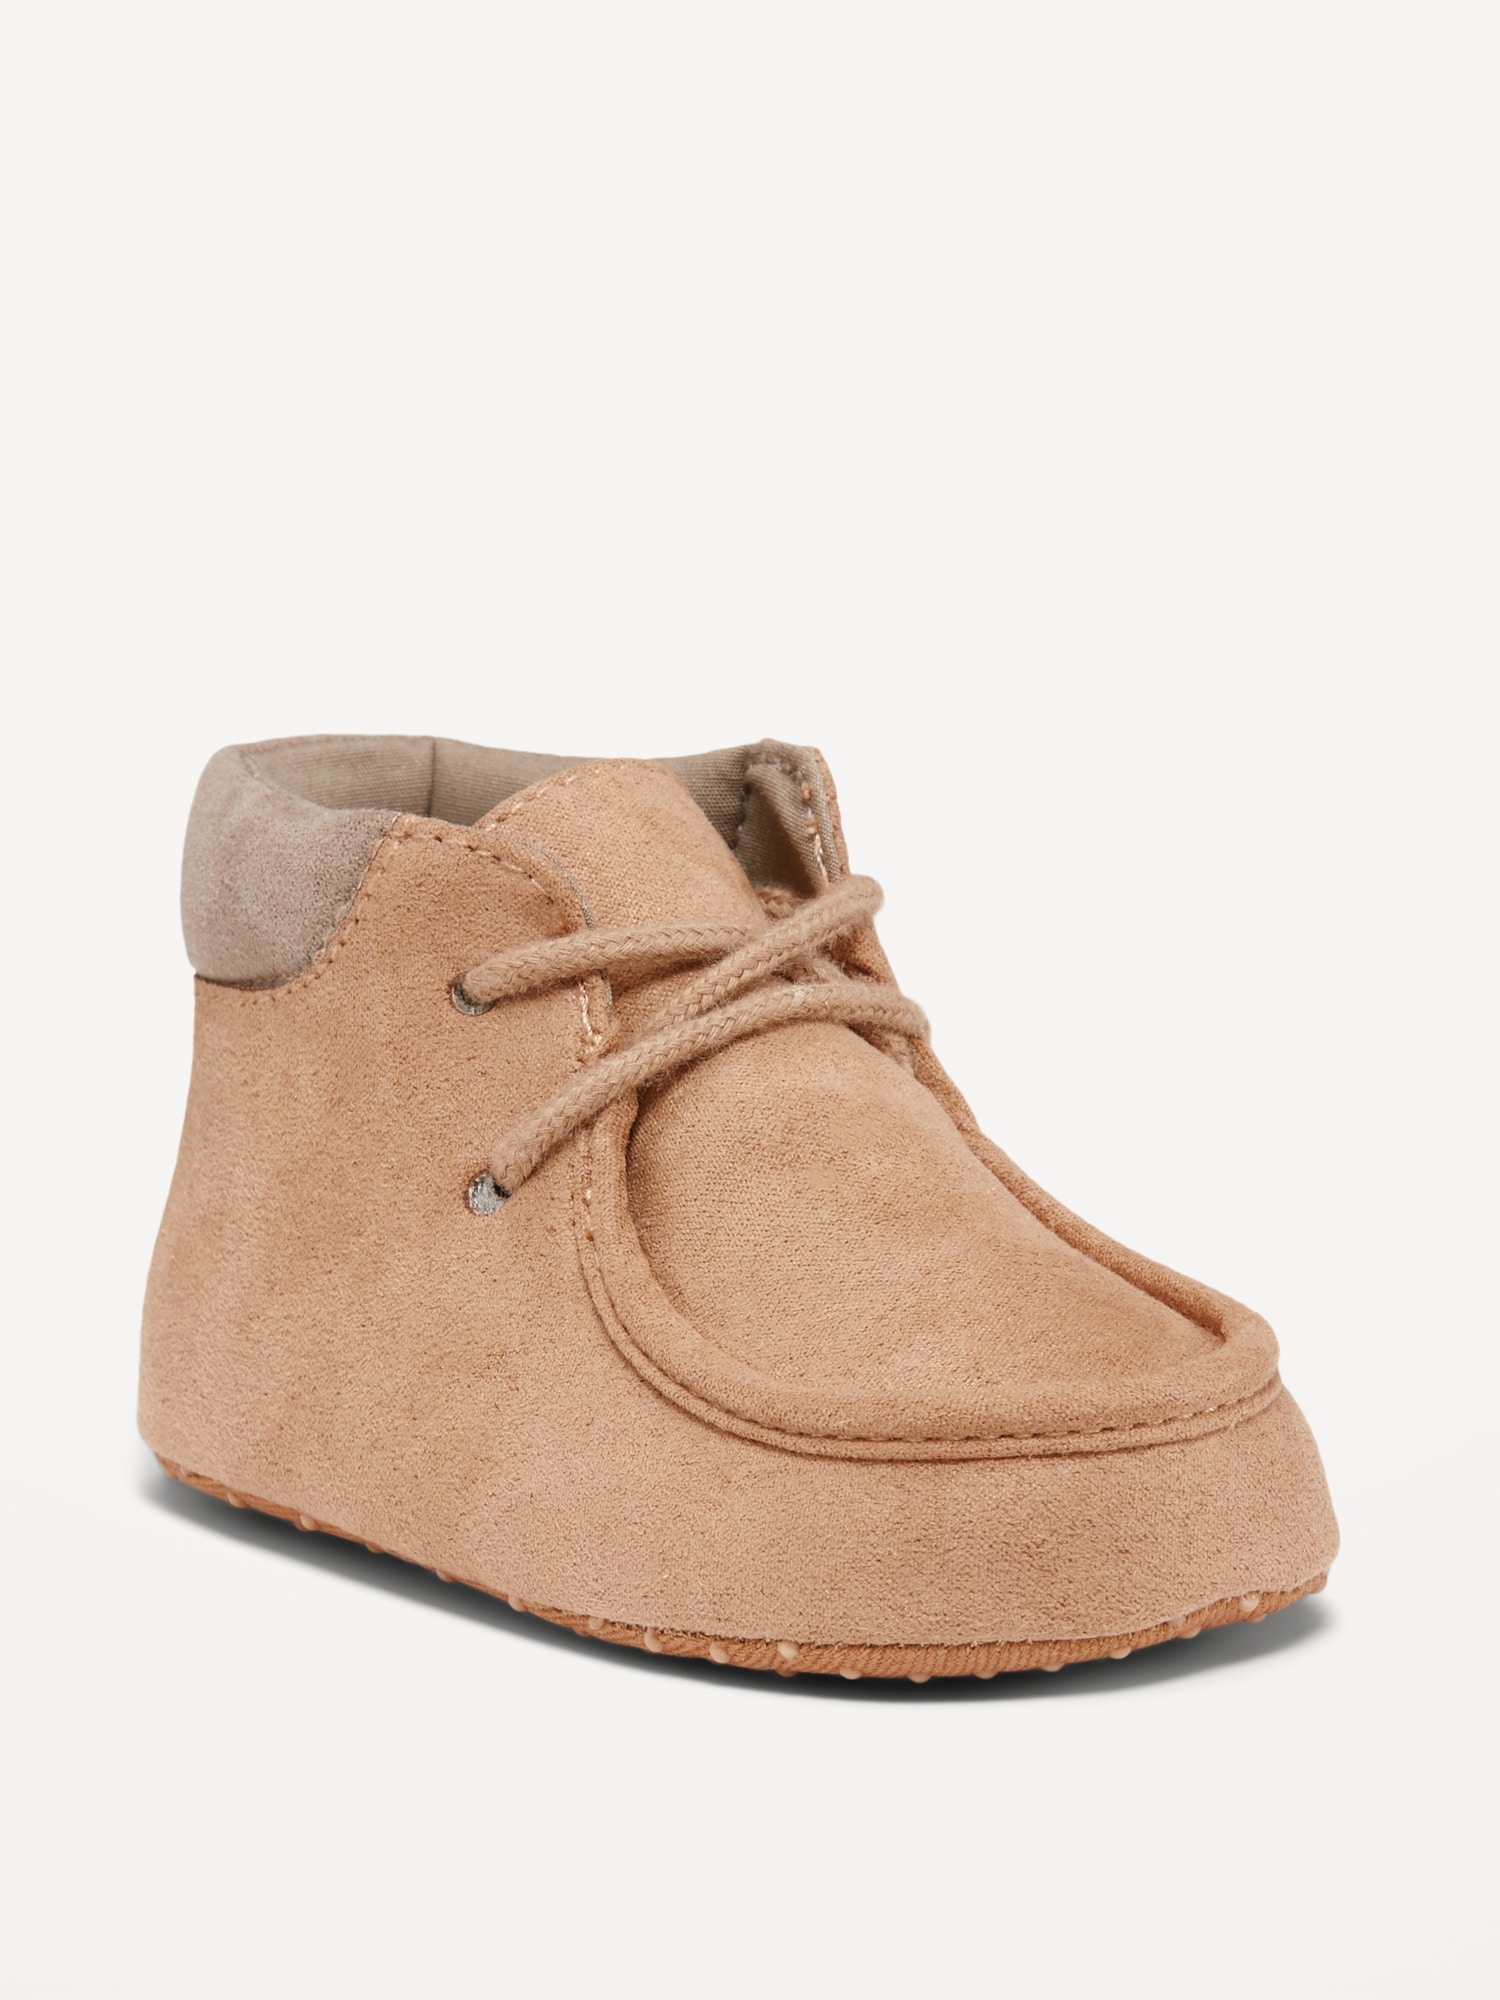 Unisex Faux-Suede Booties for Baby